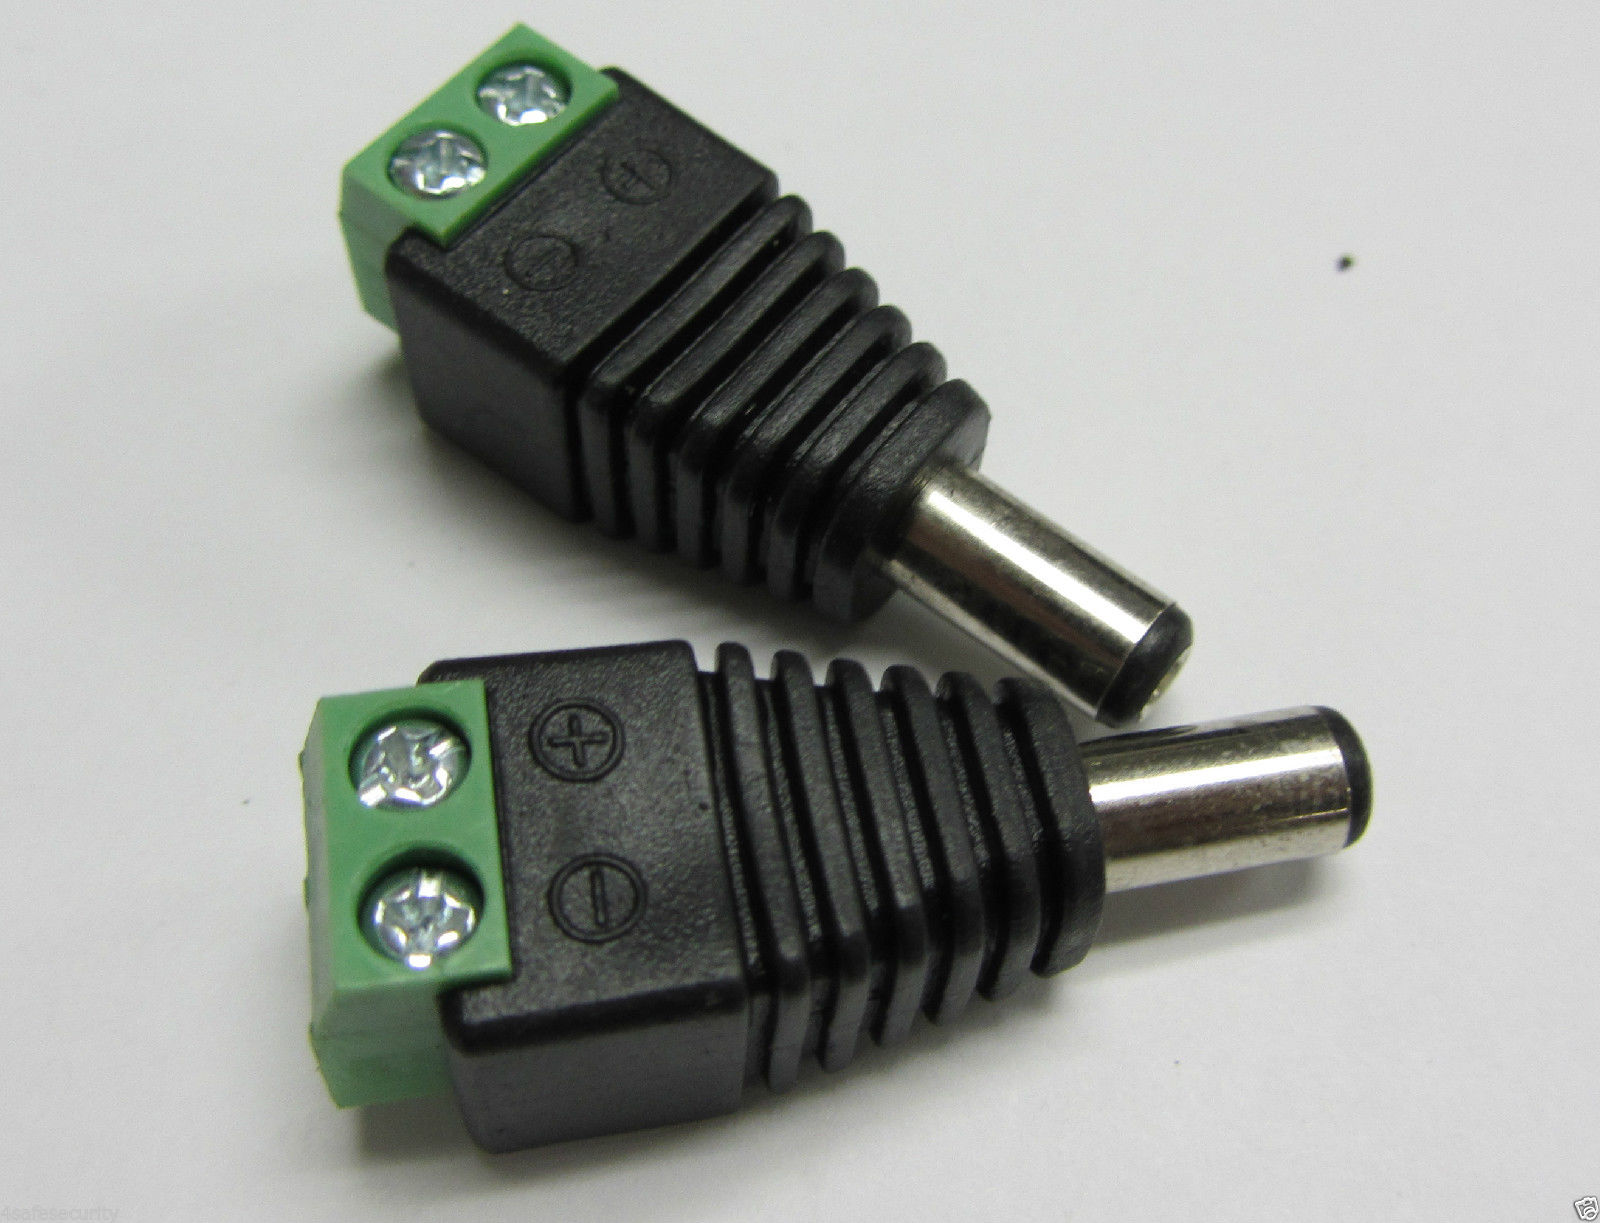 2.1mm*5.5mm CCTV camera DC Power Male Jack Connector